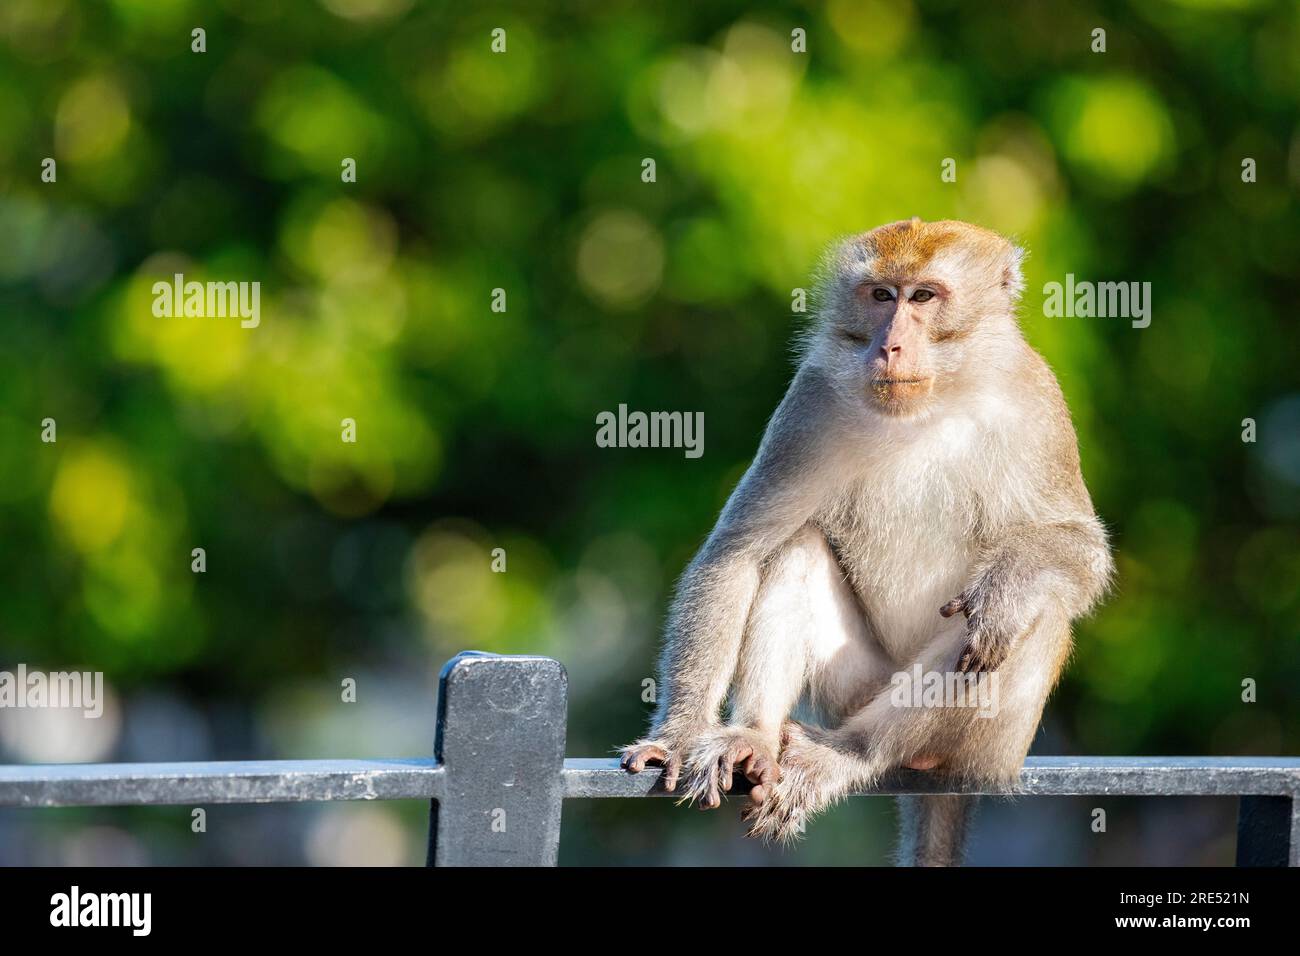 A long-tailed macaque sits on the ballustrade of Sunrise Gateway above the Serangoon Reservoir, Singapore Stock Photo